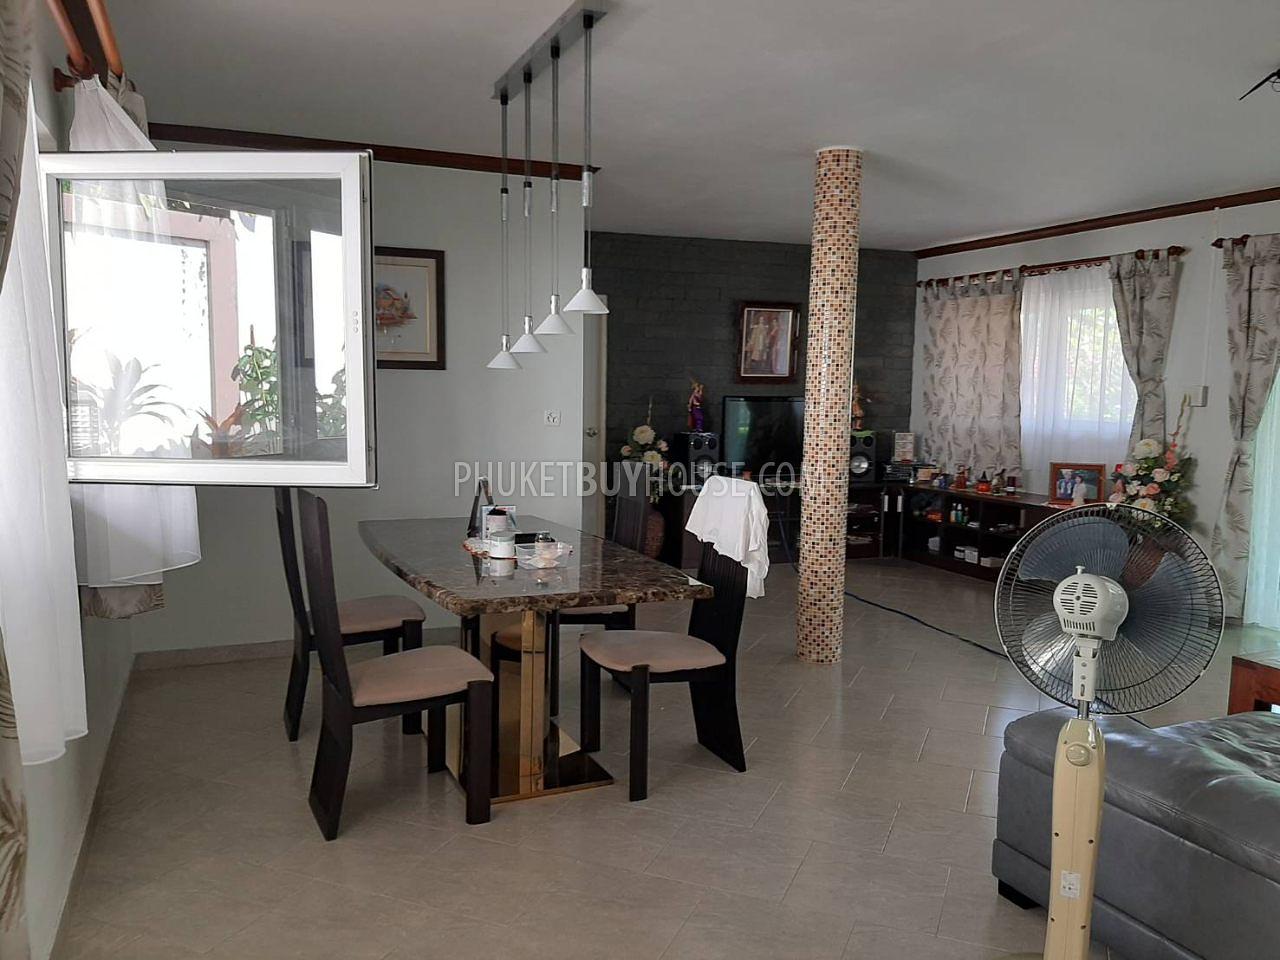 CHA6709: Spacious Villa for Sale in Chalong Area. Photo #10